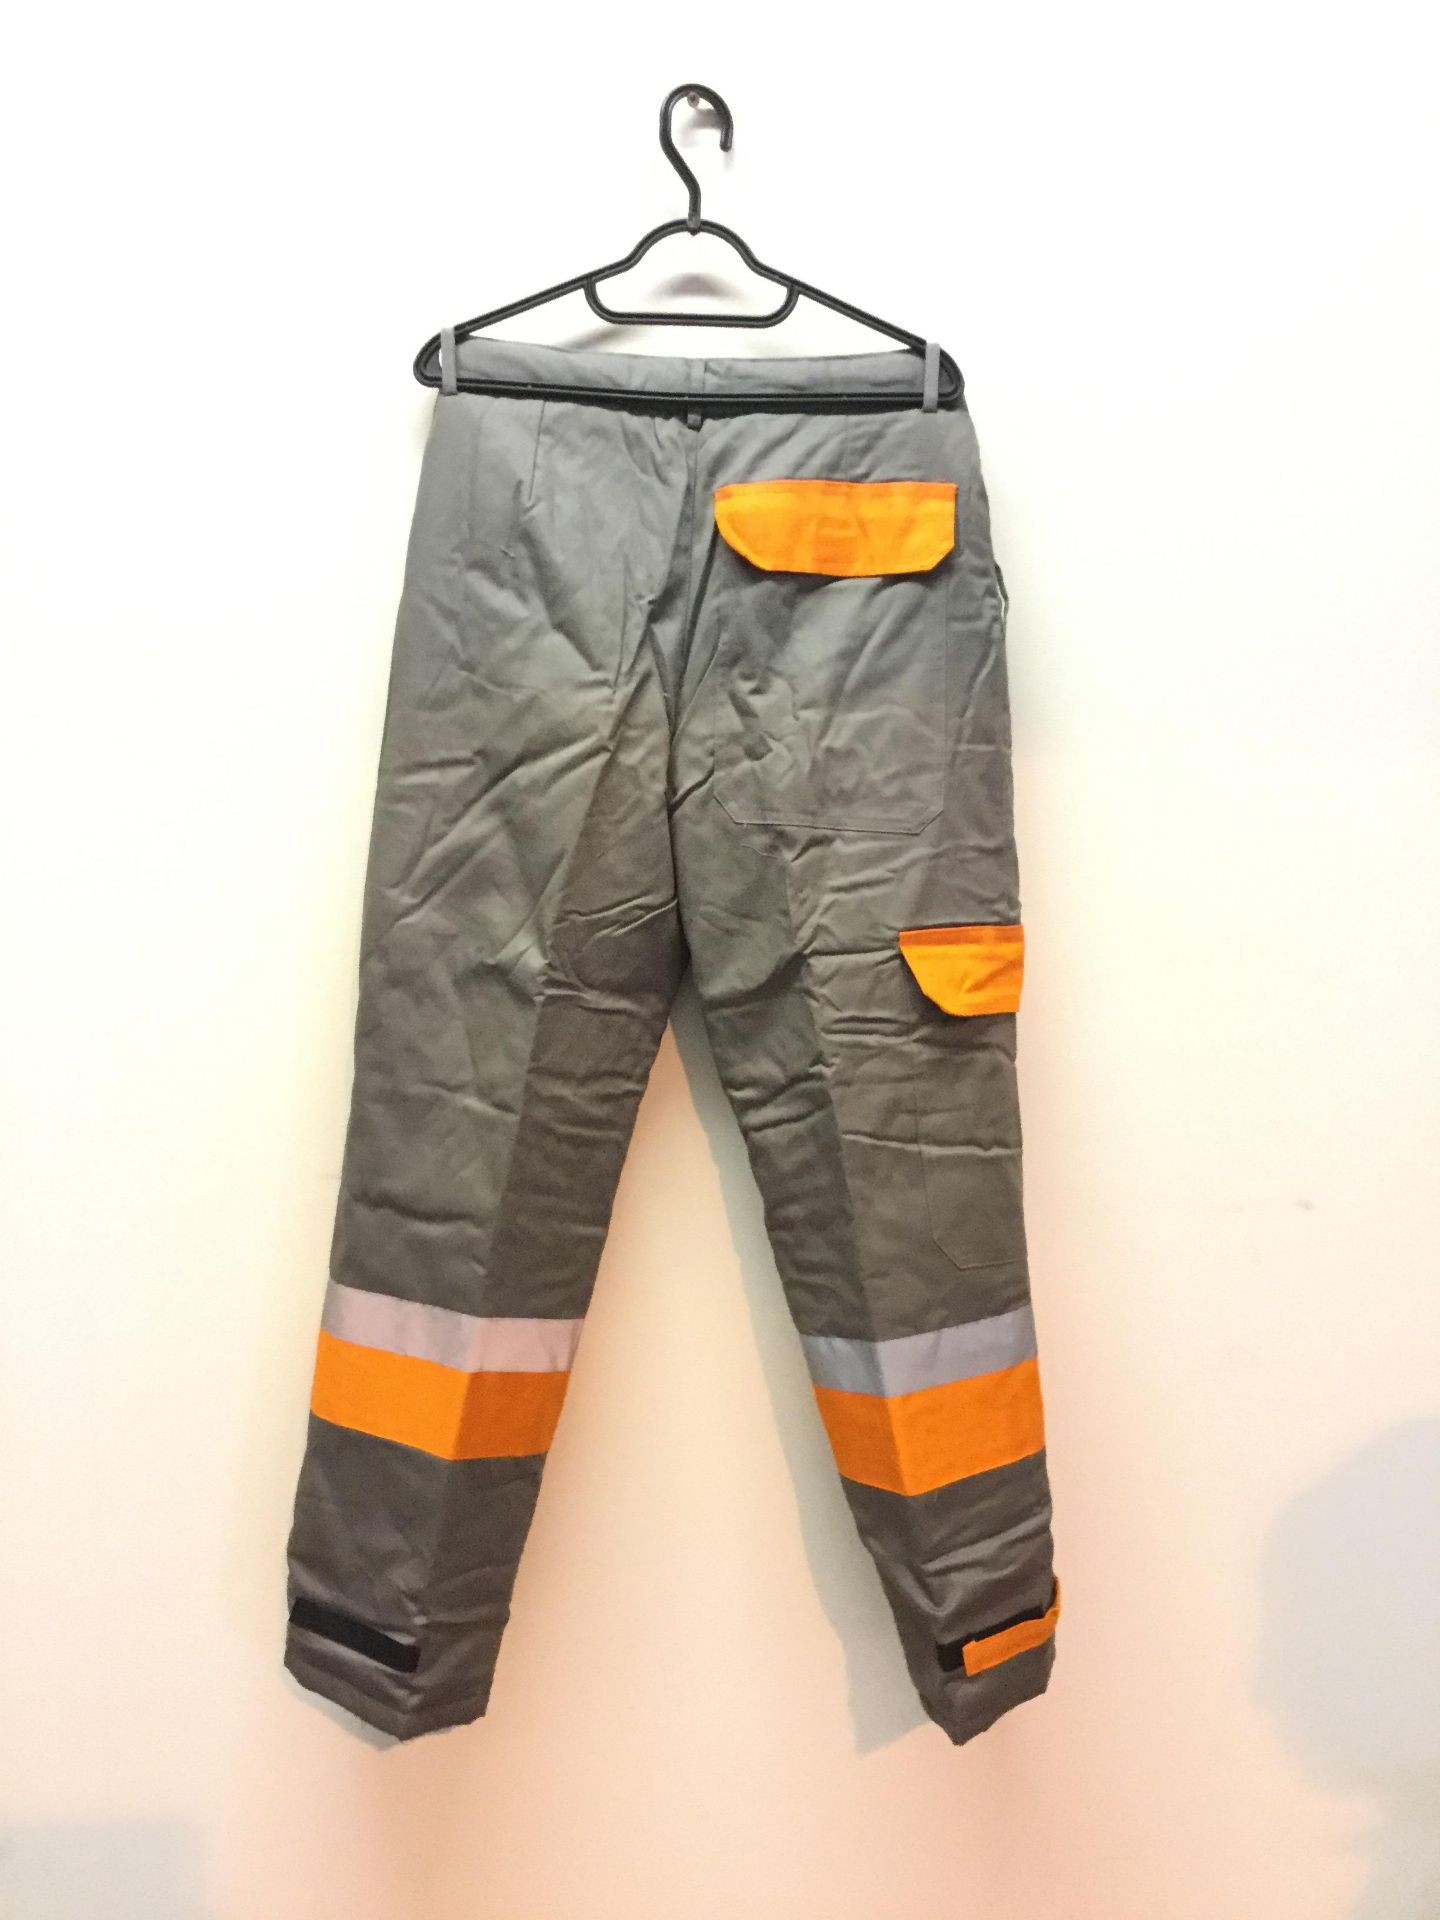 Flame Retardant Winter Trousers - Size 46 - Image 2 of 2